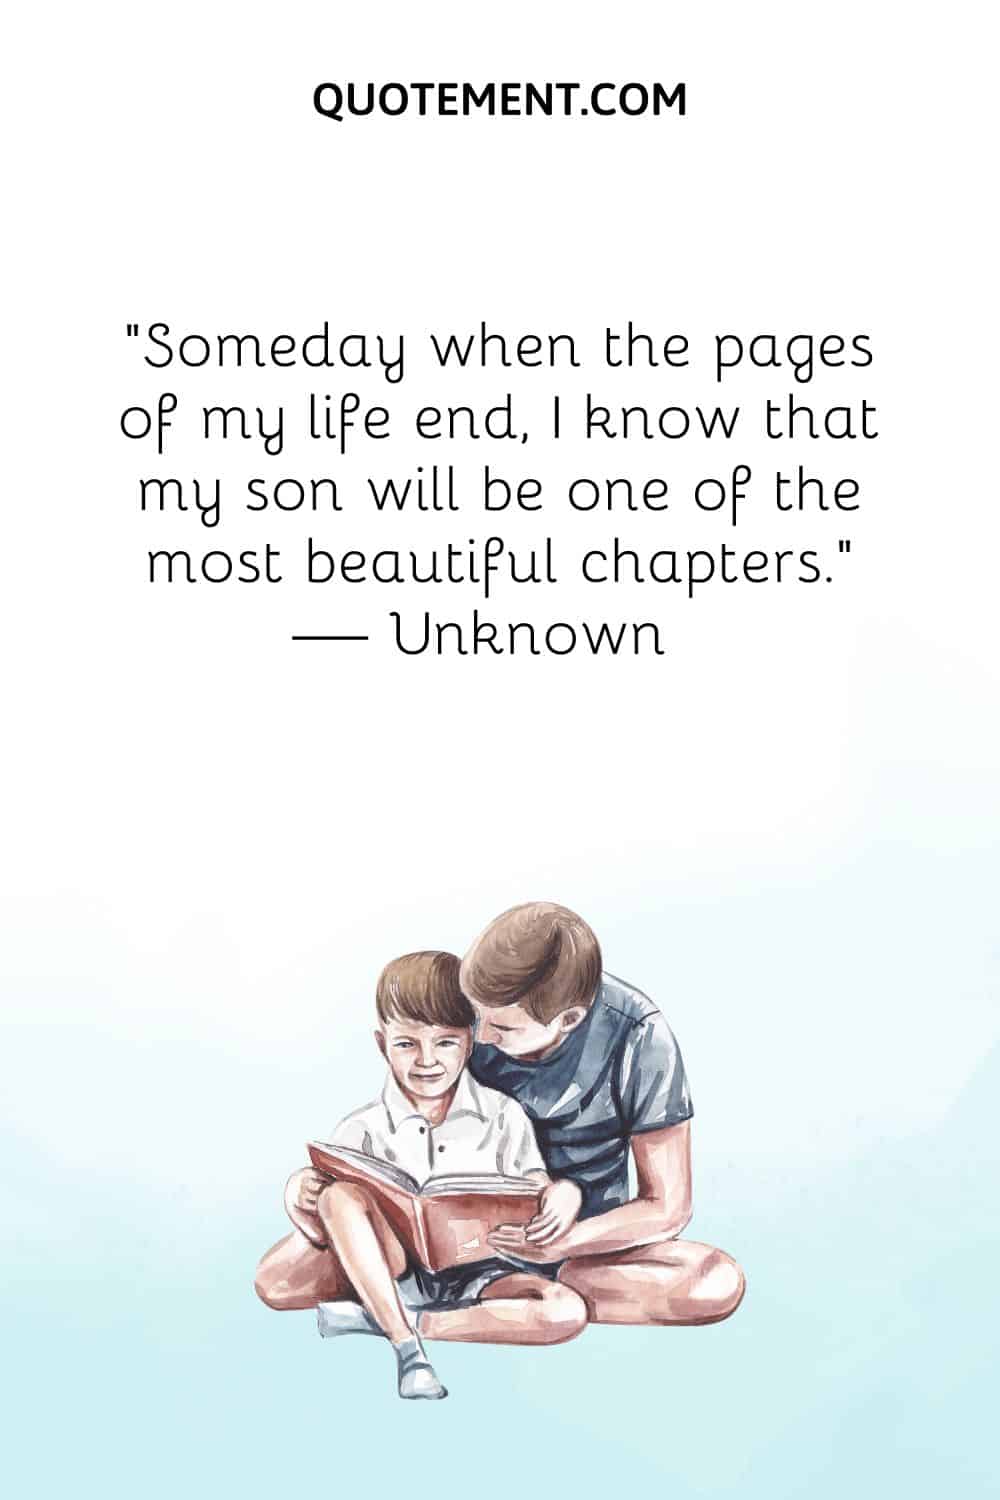 Someday when the pages of my life end, I know that my son will be one of the most beautiful chapters